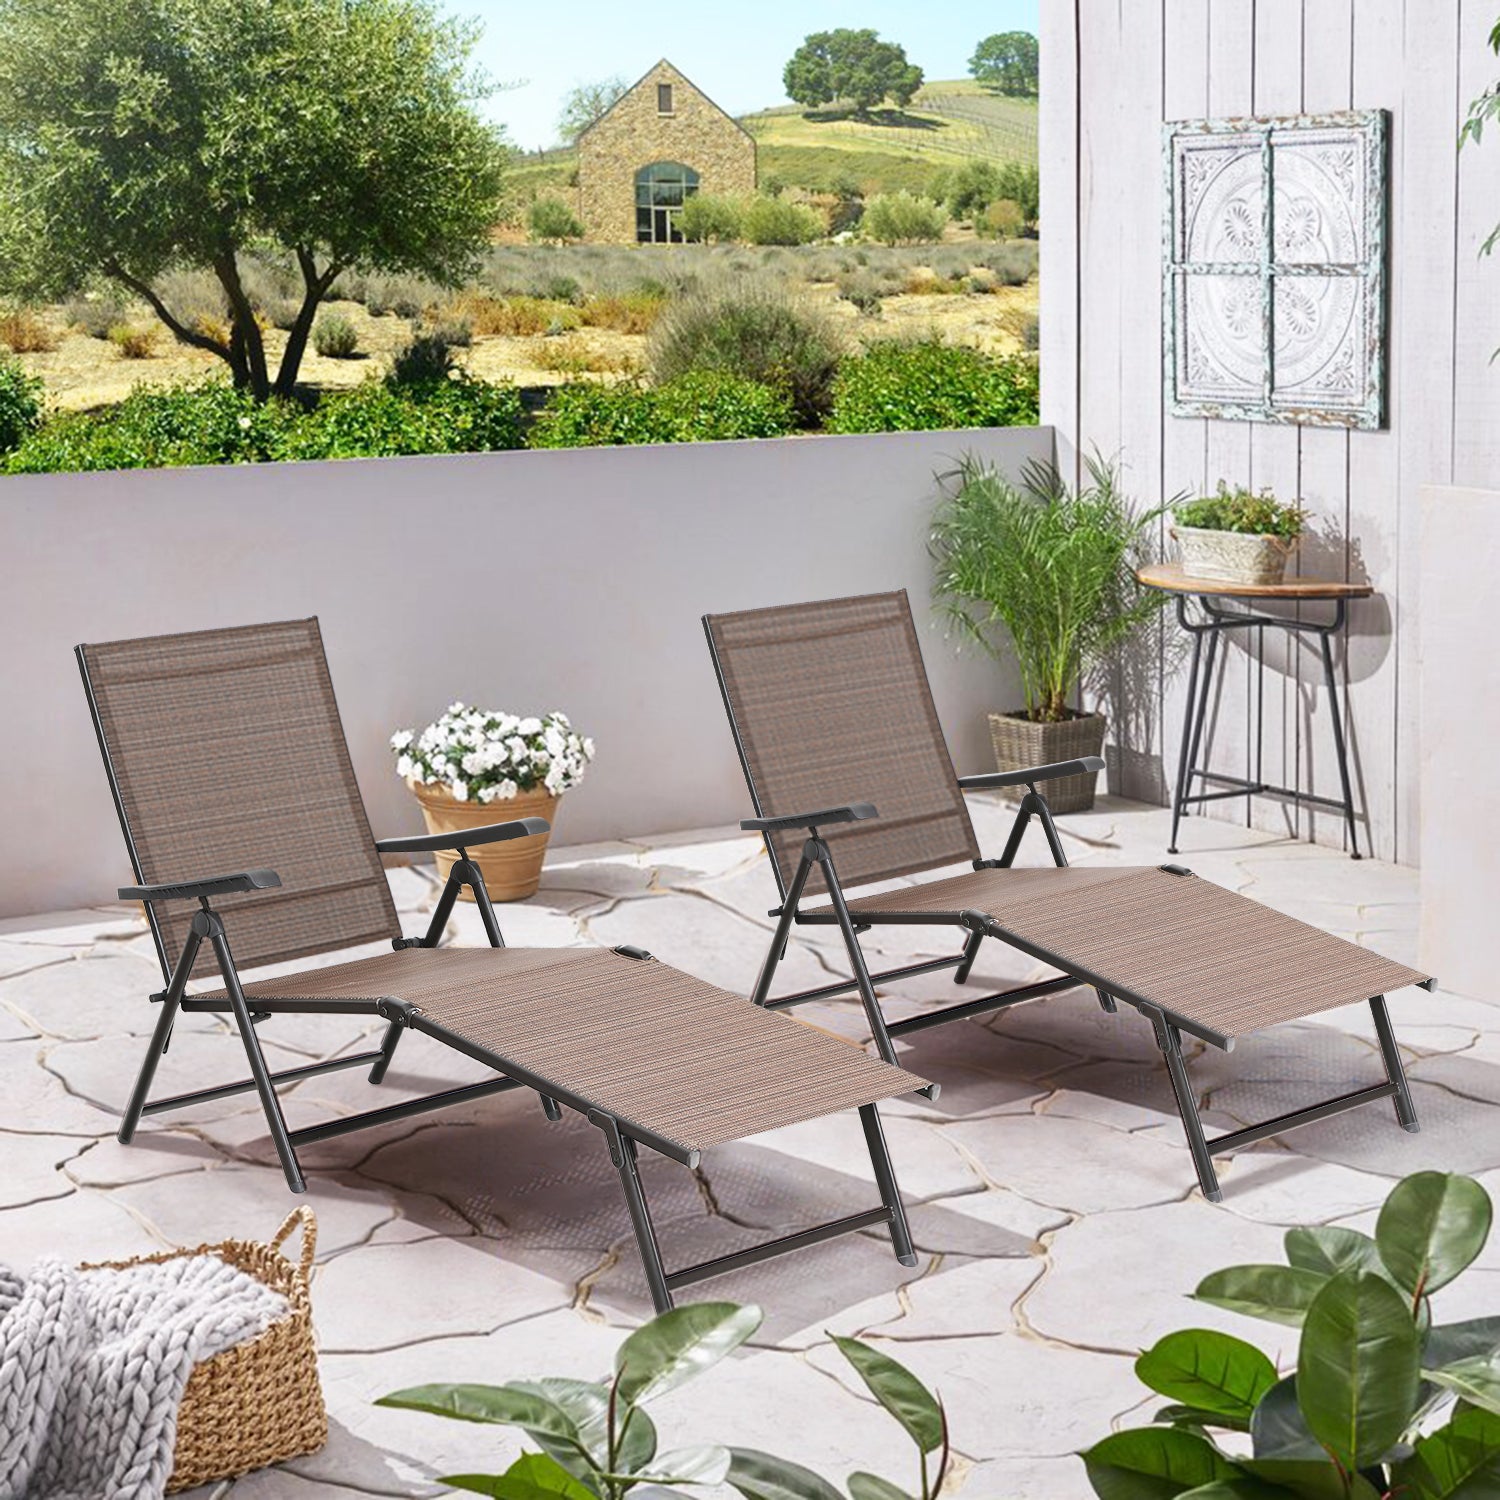 Sophia & William 5 Stages Adjustable Patio Folding Metal Lounge Chair